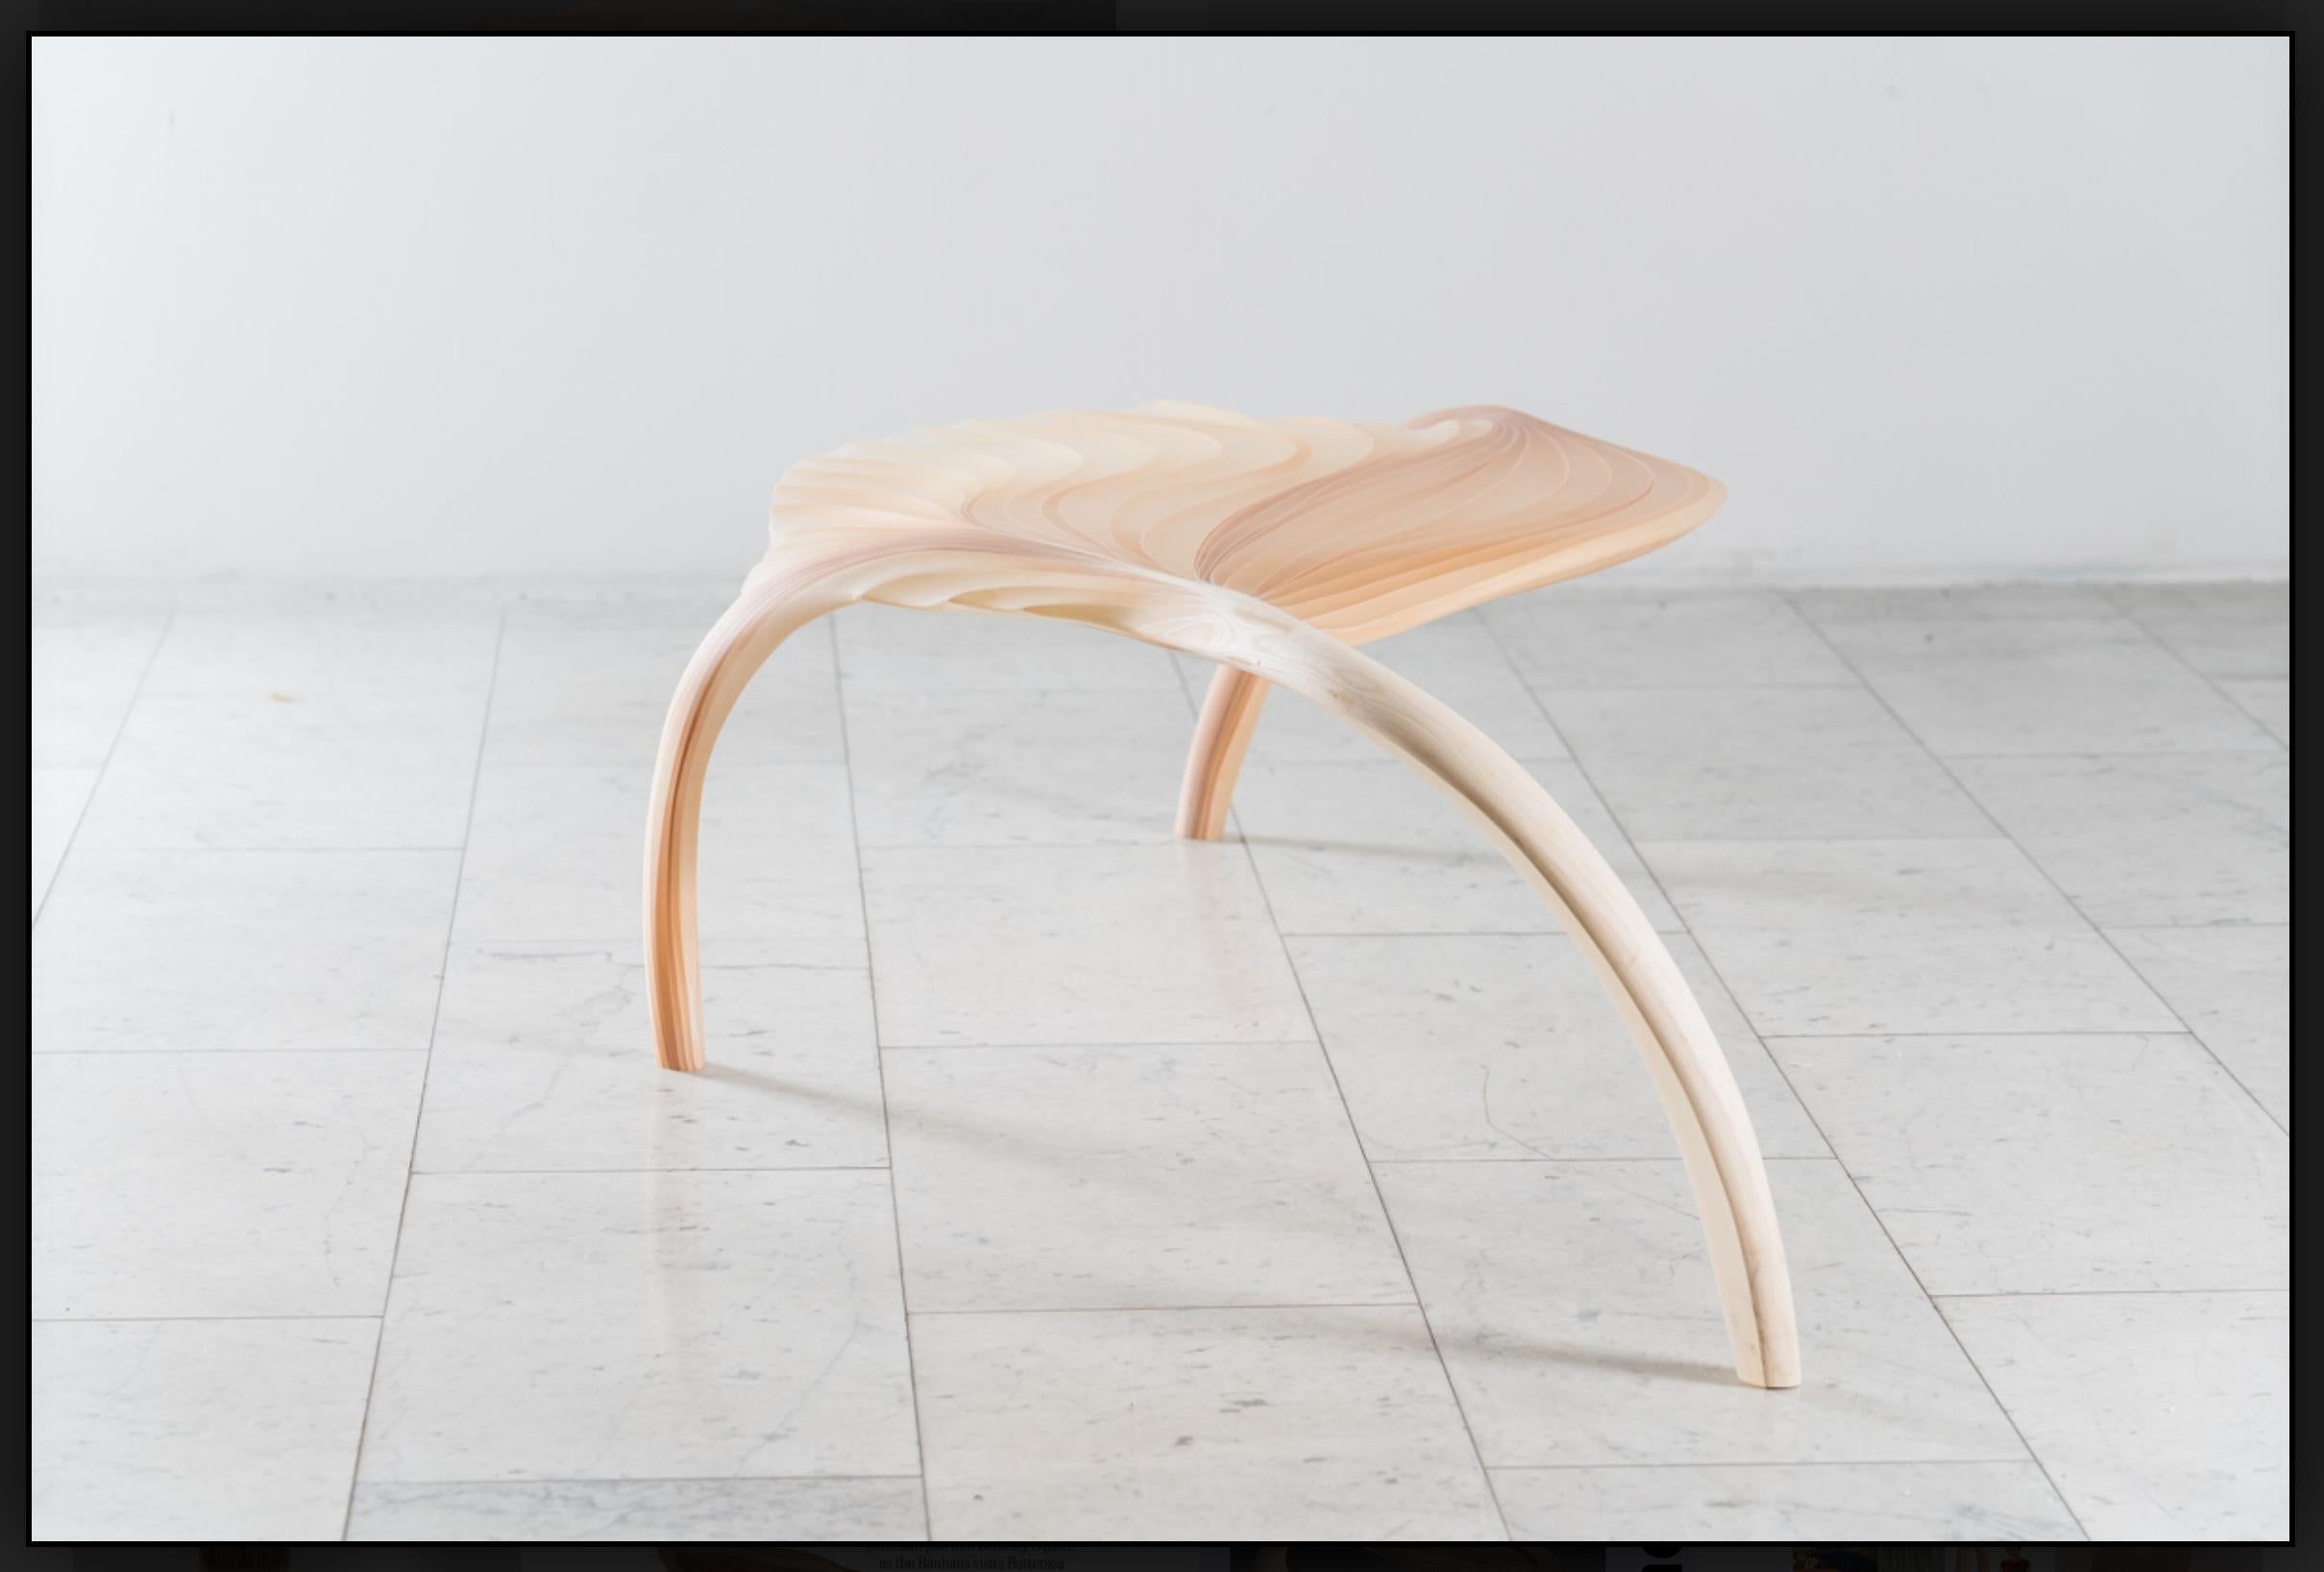 Ethereal Low table by International Artist Marc Fish. Made from sycamore and resin in a very organic sculptural form. Elegant and sinuous the piece shows real grace but also an unequivocal energy. The Ethereal series utilises unique techniques